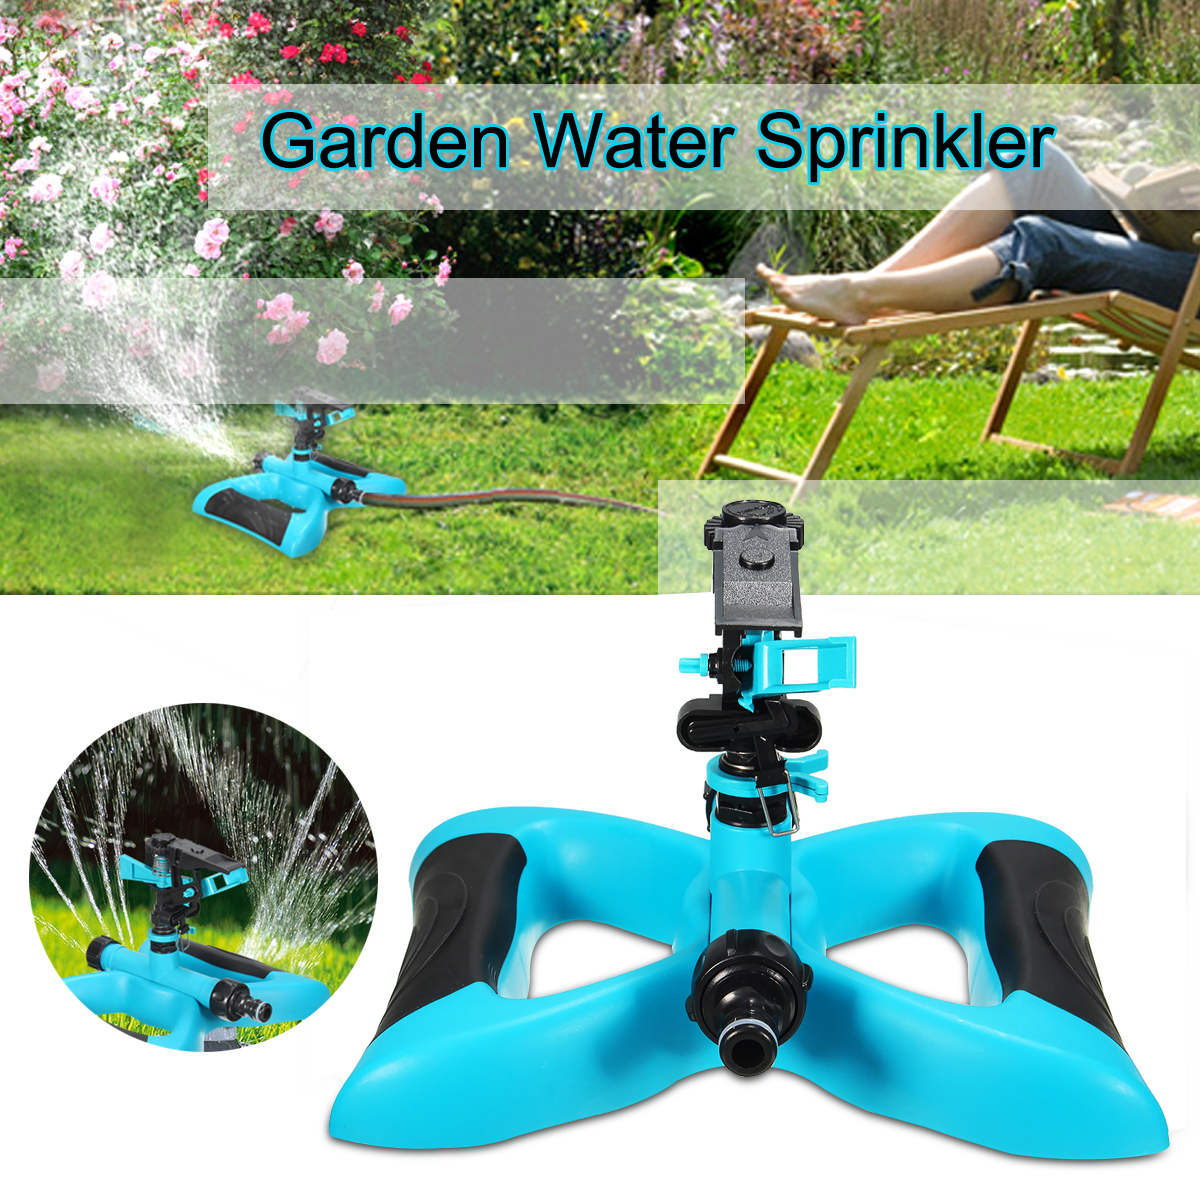 360-Degree-Rotating-Water-Sprinkler-Automatic-Watering-Lawn-Garden-Plant-Yard-Irrigation-System-1181075-1